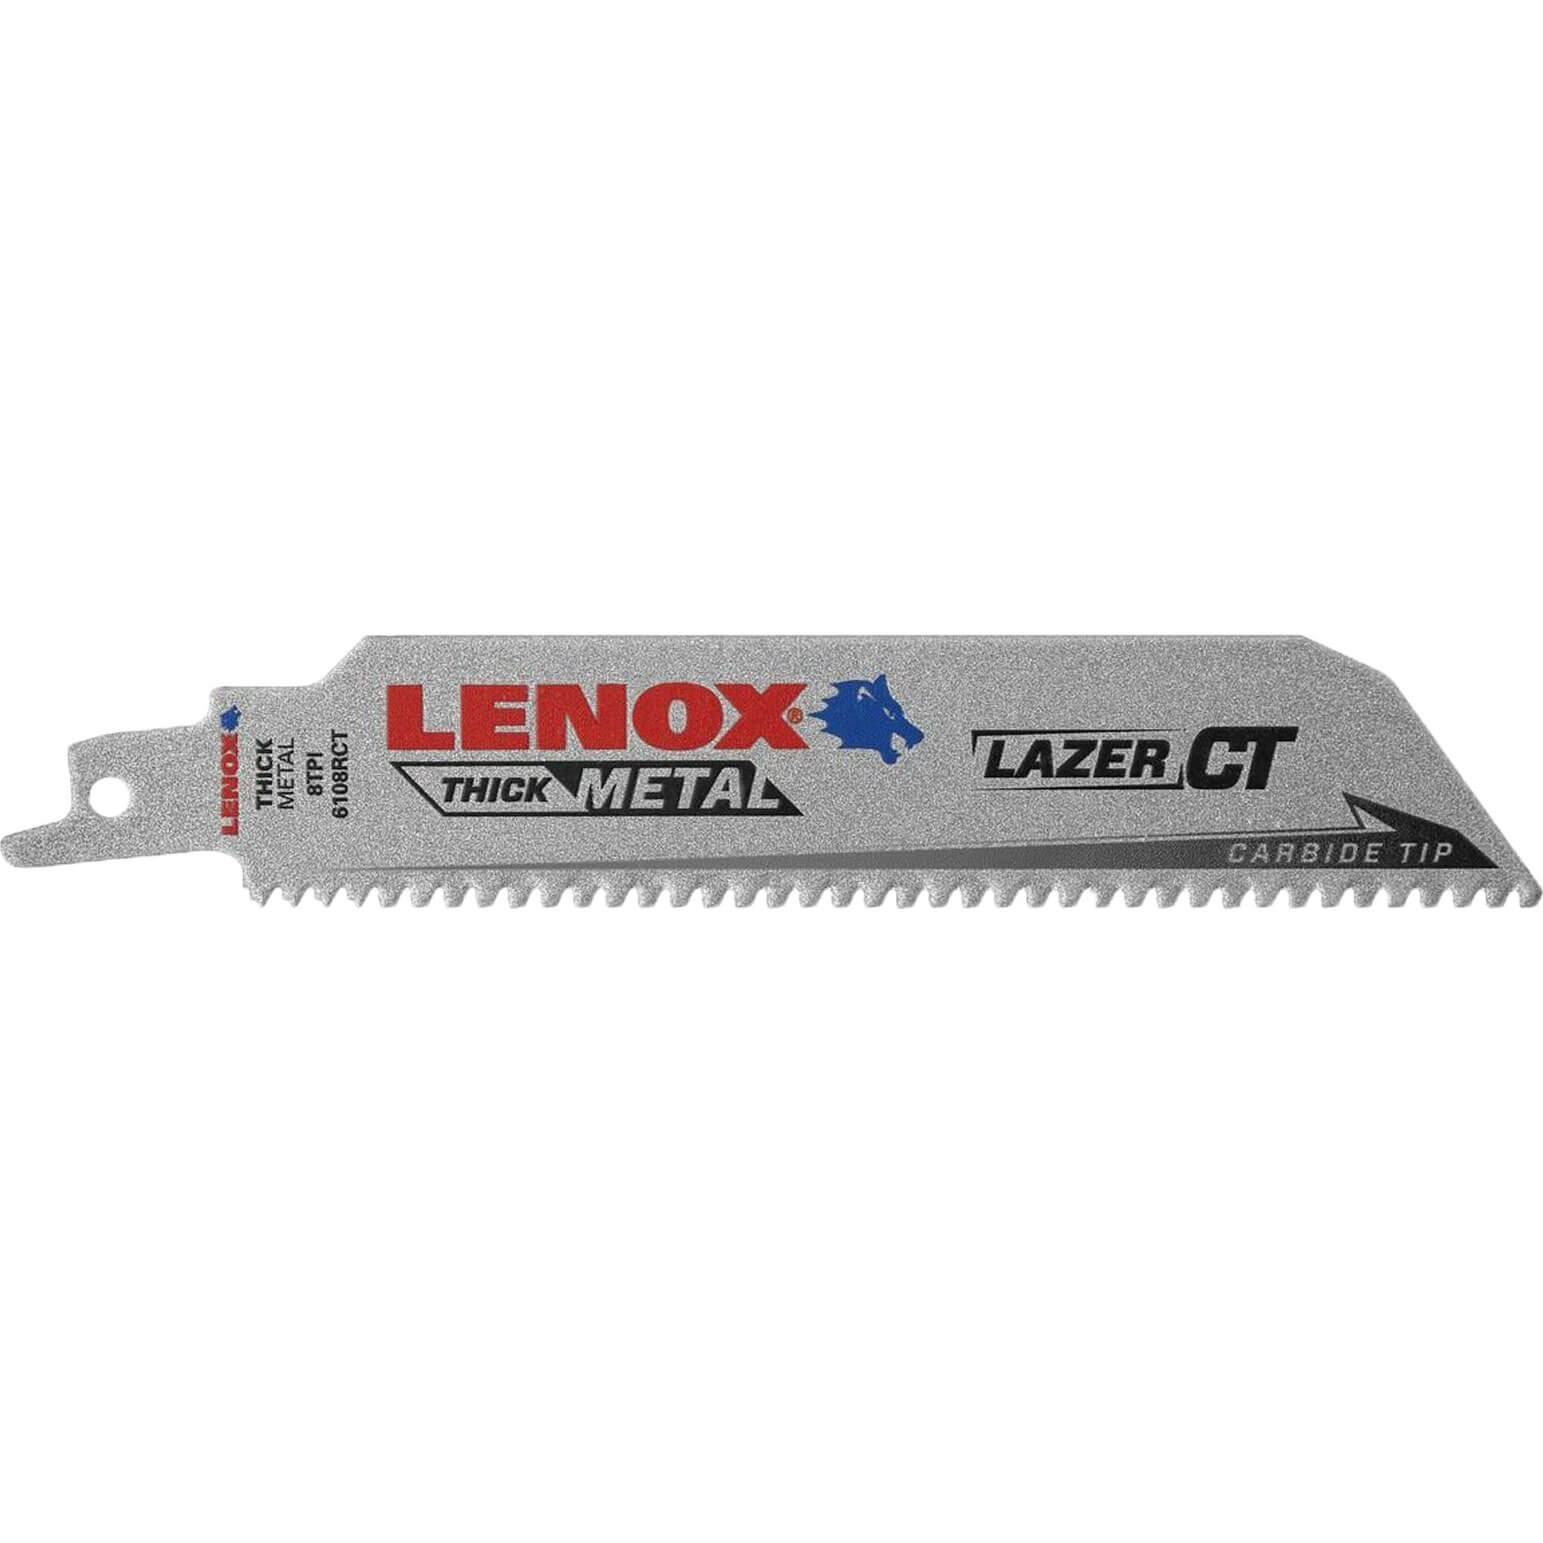 Image of Lenox Lazer CT Carbide Tipped Reciprocating Sabre Saw Blades 100mm Pack of 1